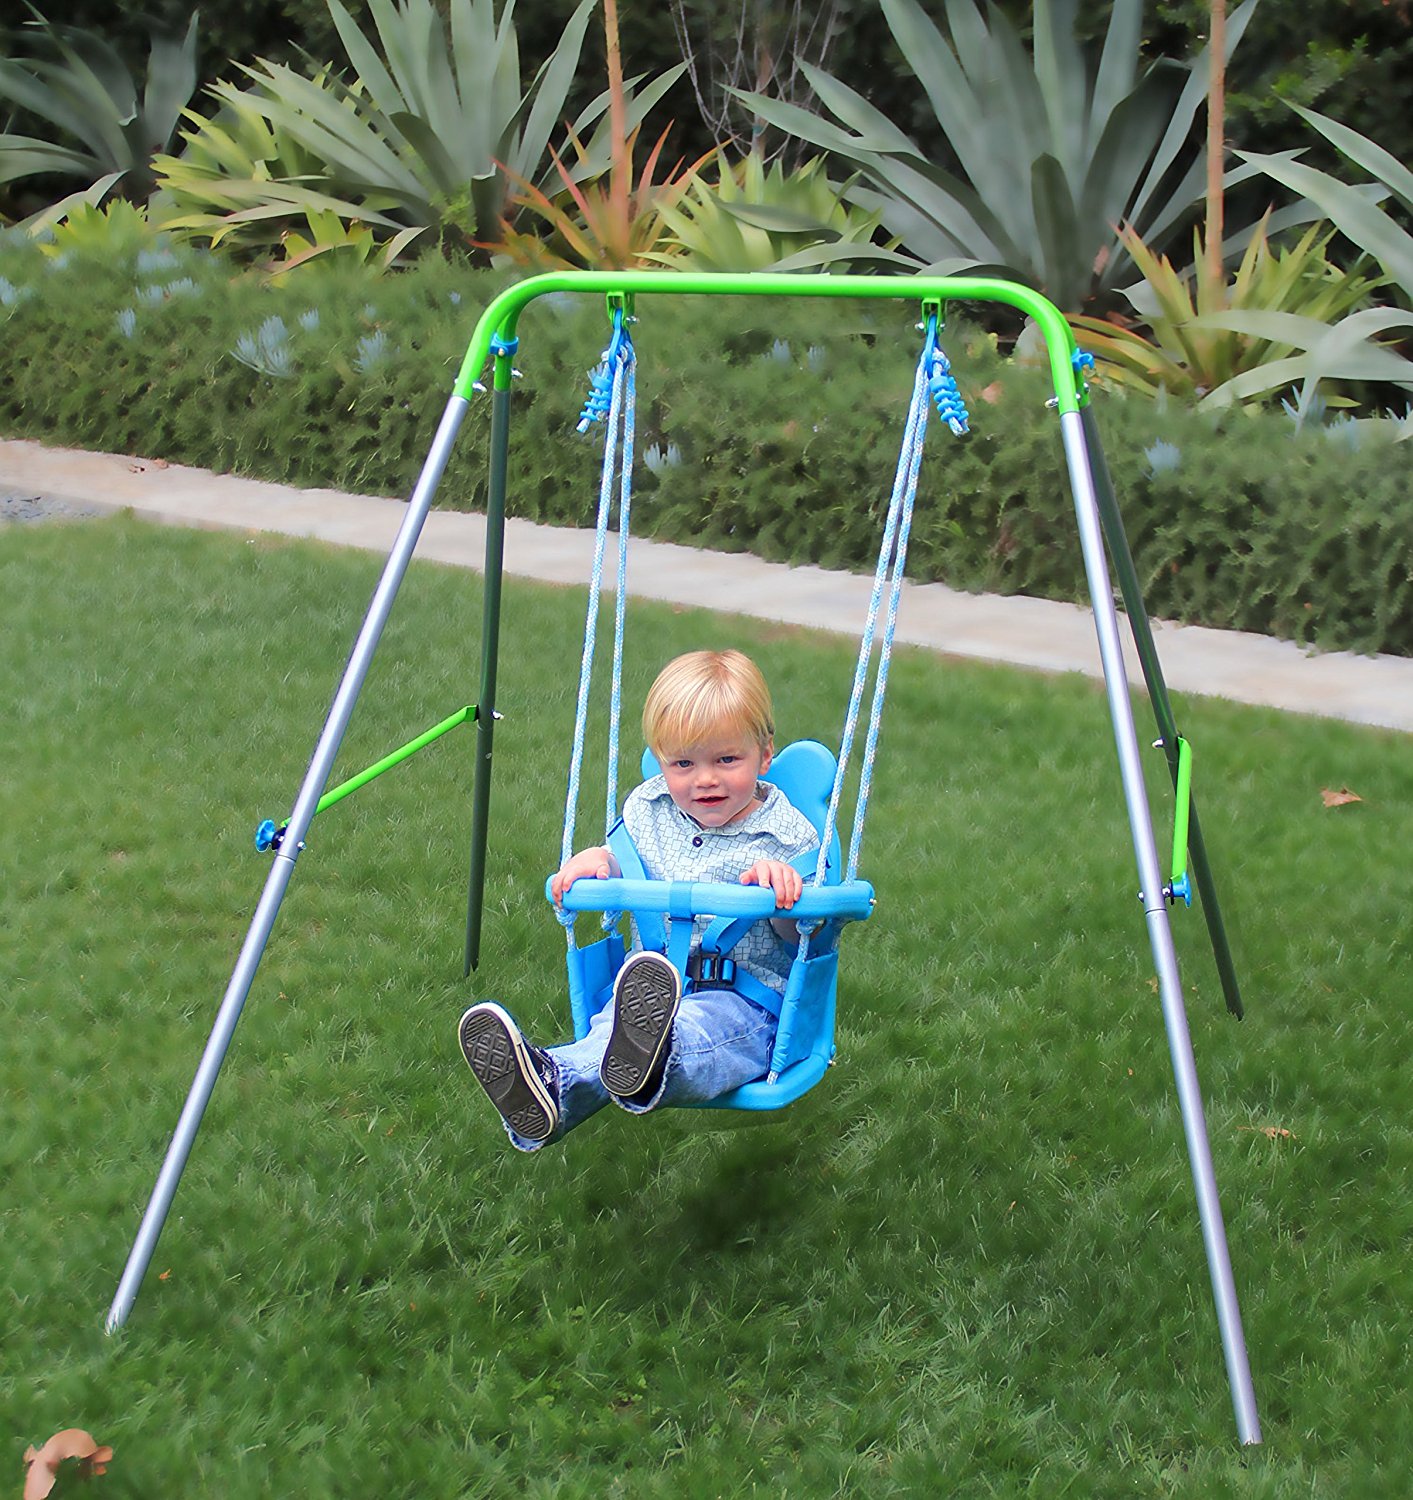 Amazon.com: Sportspower My First Toddler Swing: Toys & Games